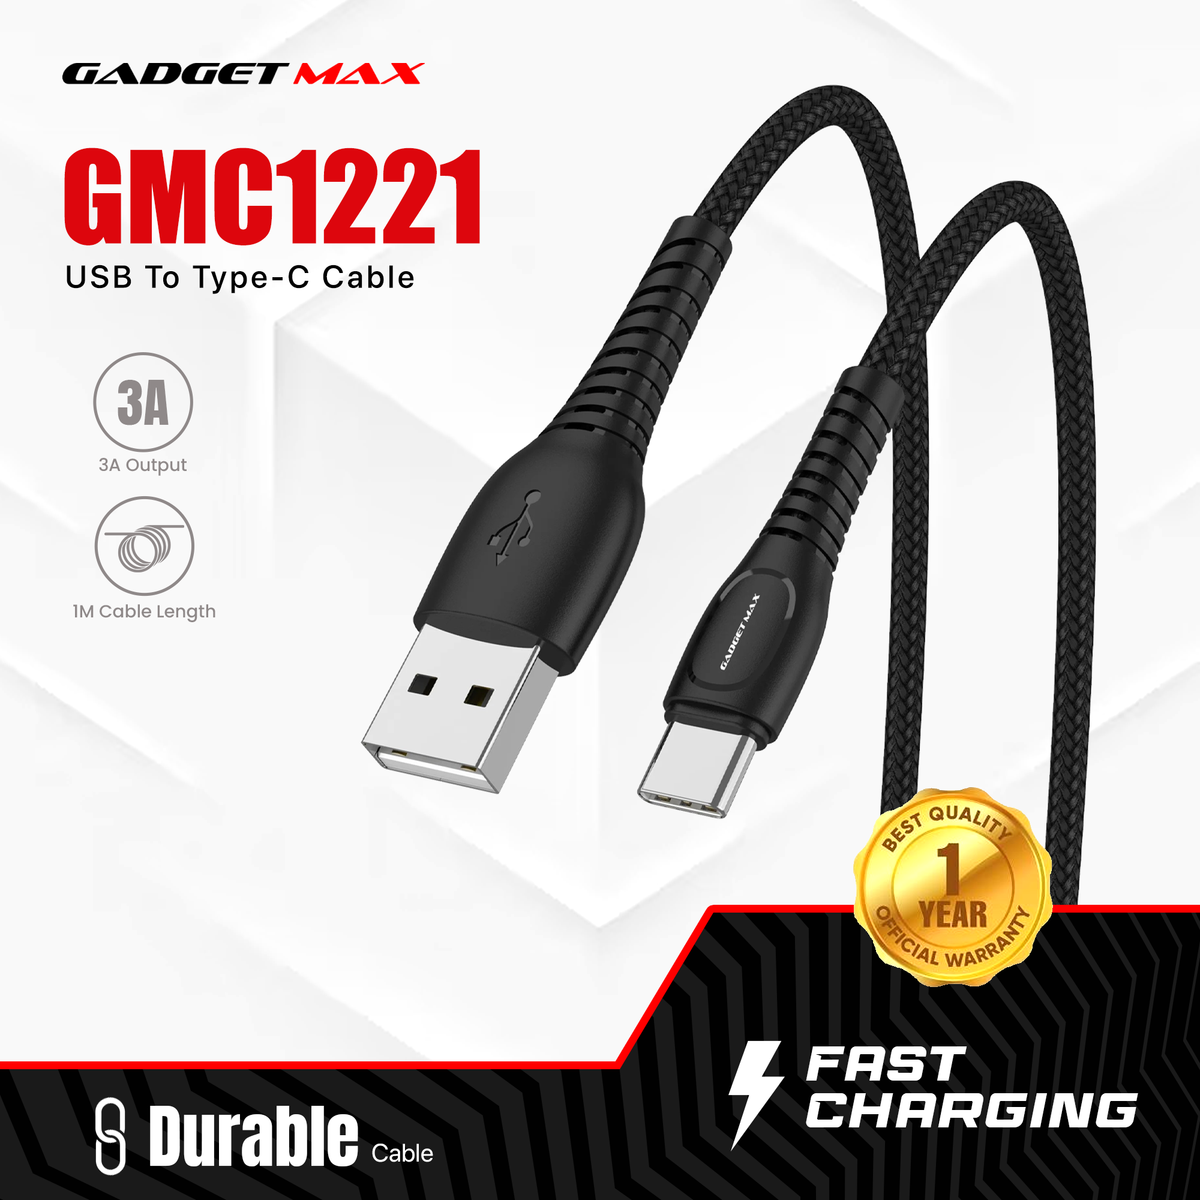 GADGET MAX GMC1221 USB TO TYPE-C CABLE (3A) (1M) - ‌WHITE